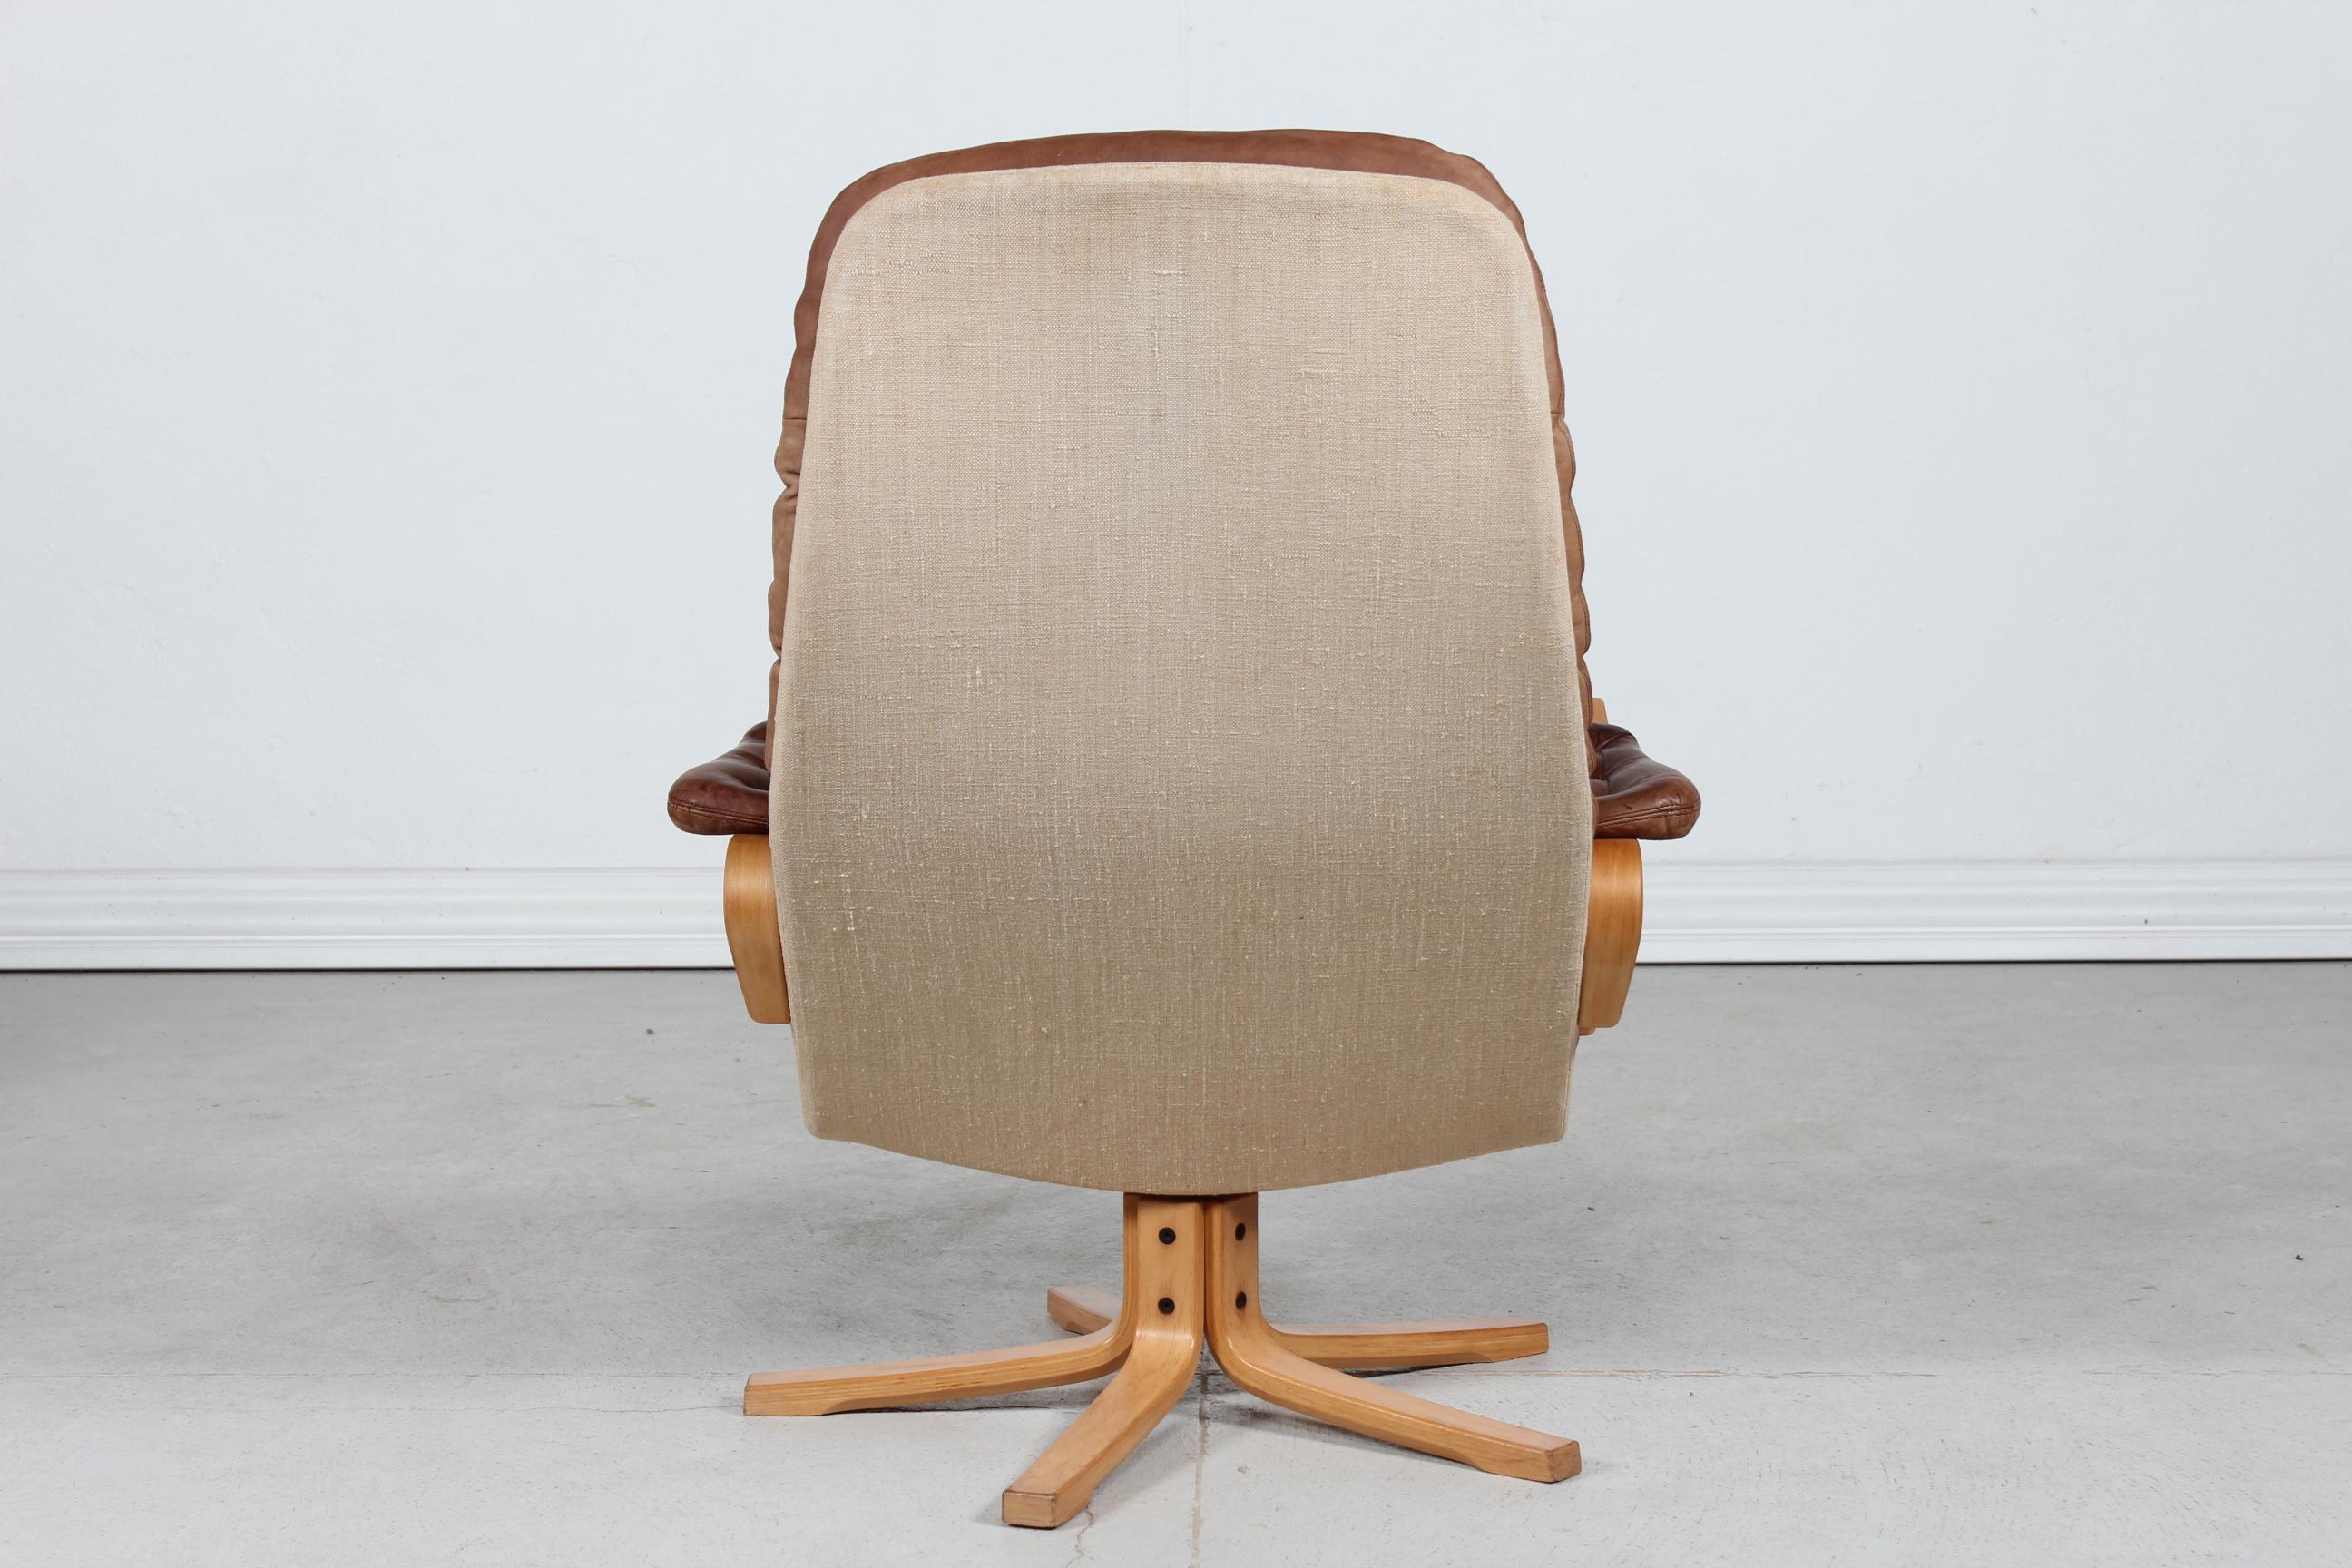 Mid-Century Modern Swedish Sam Larsson Mona Roto Swivel Chair Beech and Cognac Colored Leather 1970 For Sale